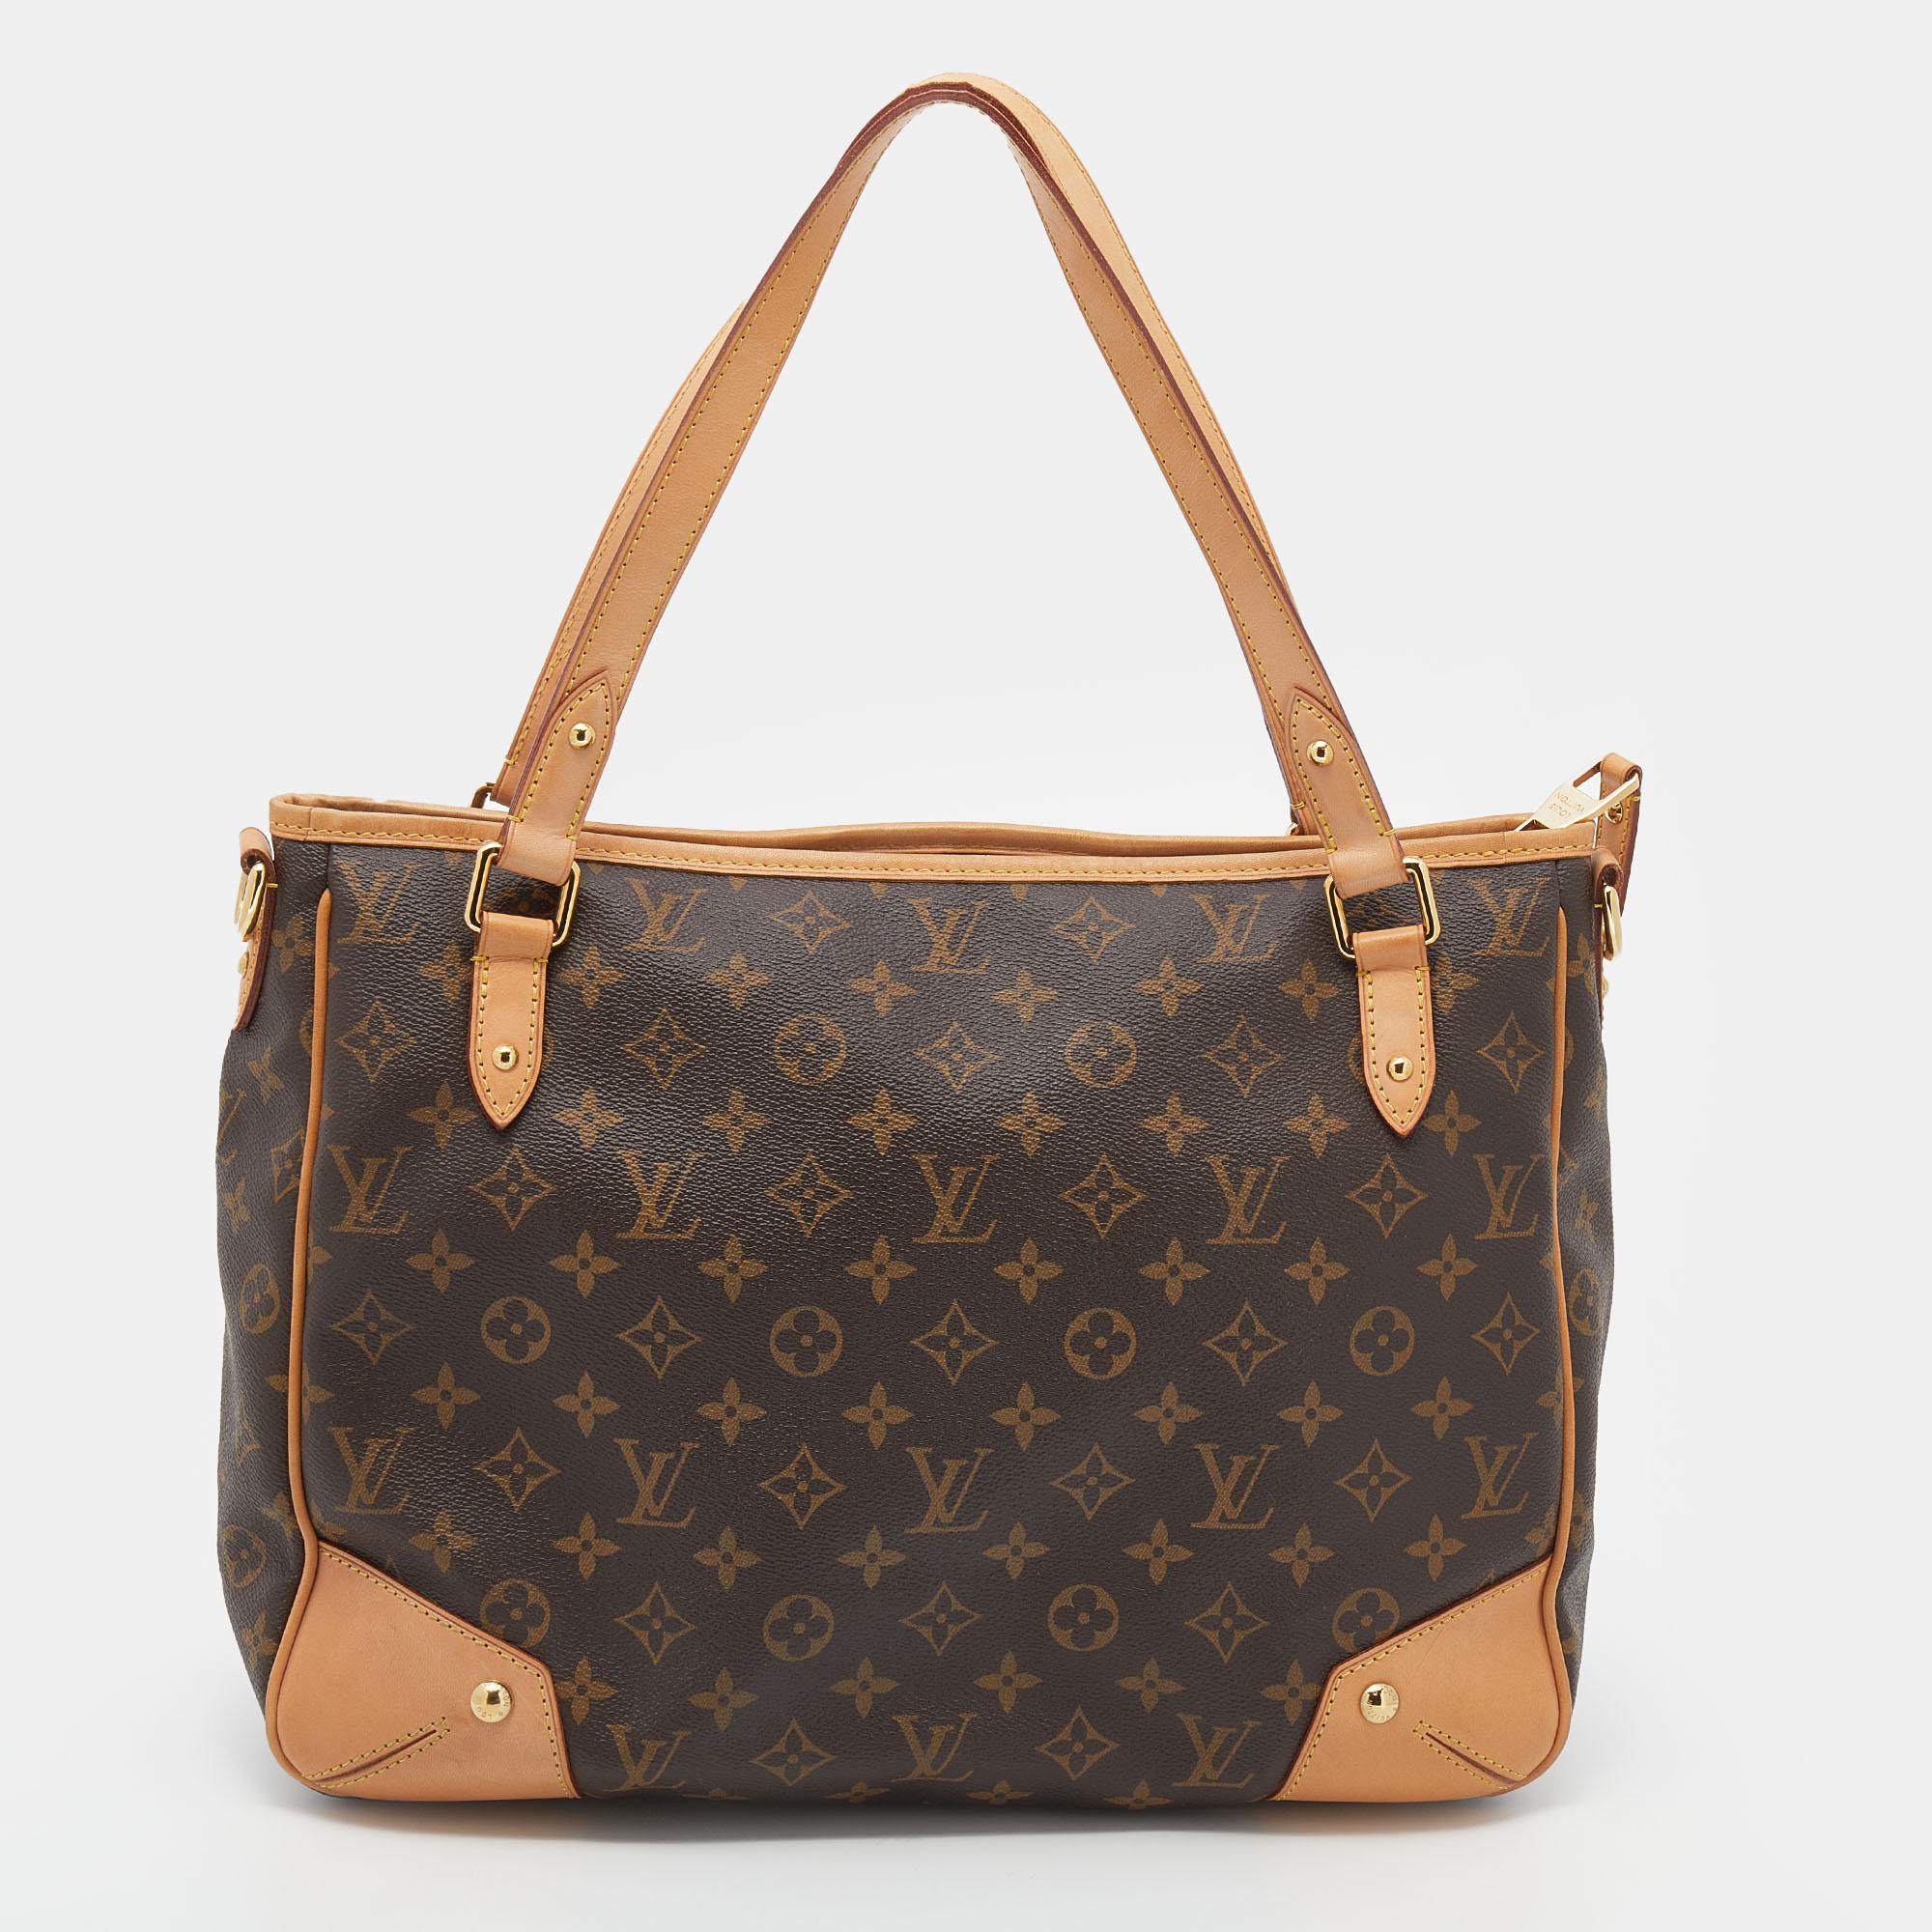 Louis Vuitton's handbags are popular owing to their high style and functionality. This Estrela bag, like all the other handbags, is durable and chic. Crafted from Monogram canvas and leather trims, the bag comes with two flat top handles and a